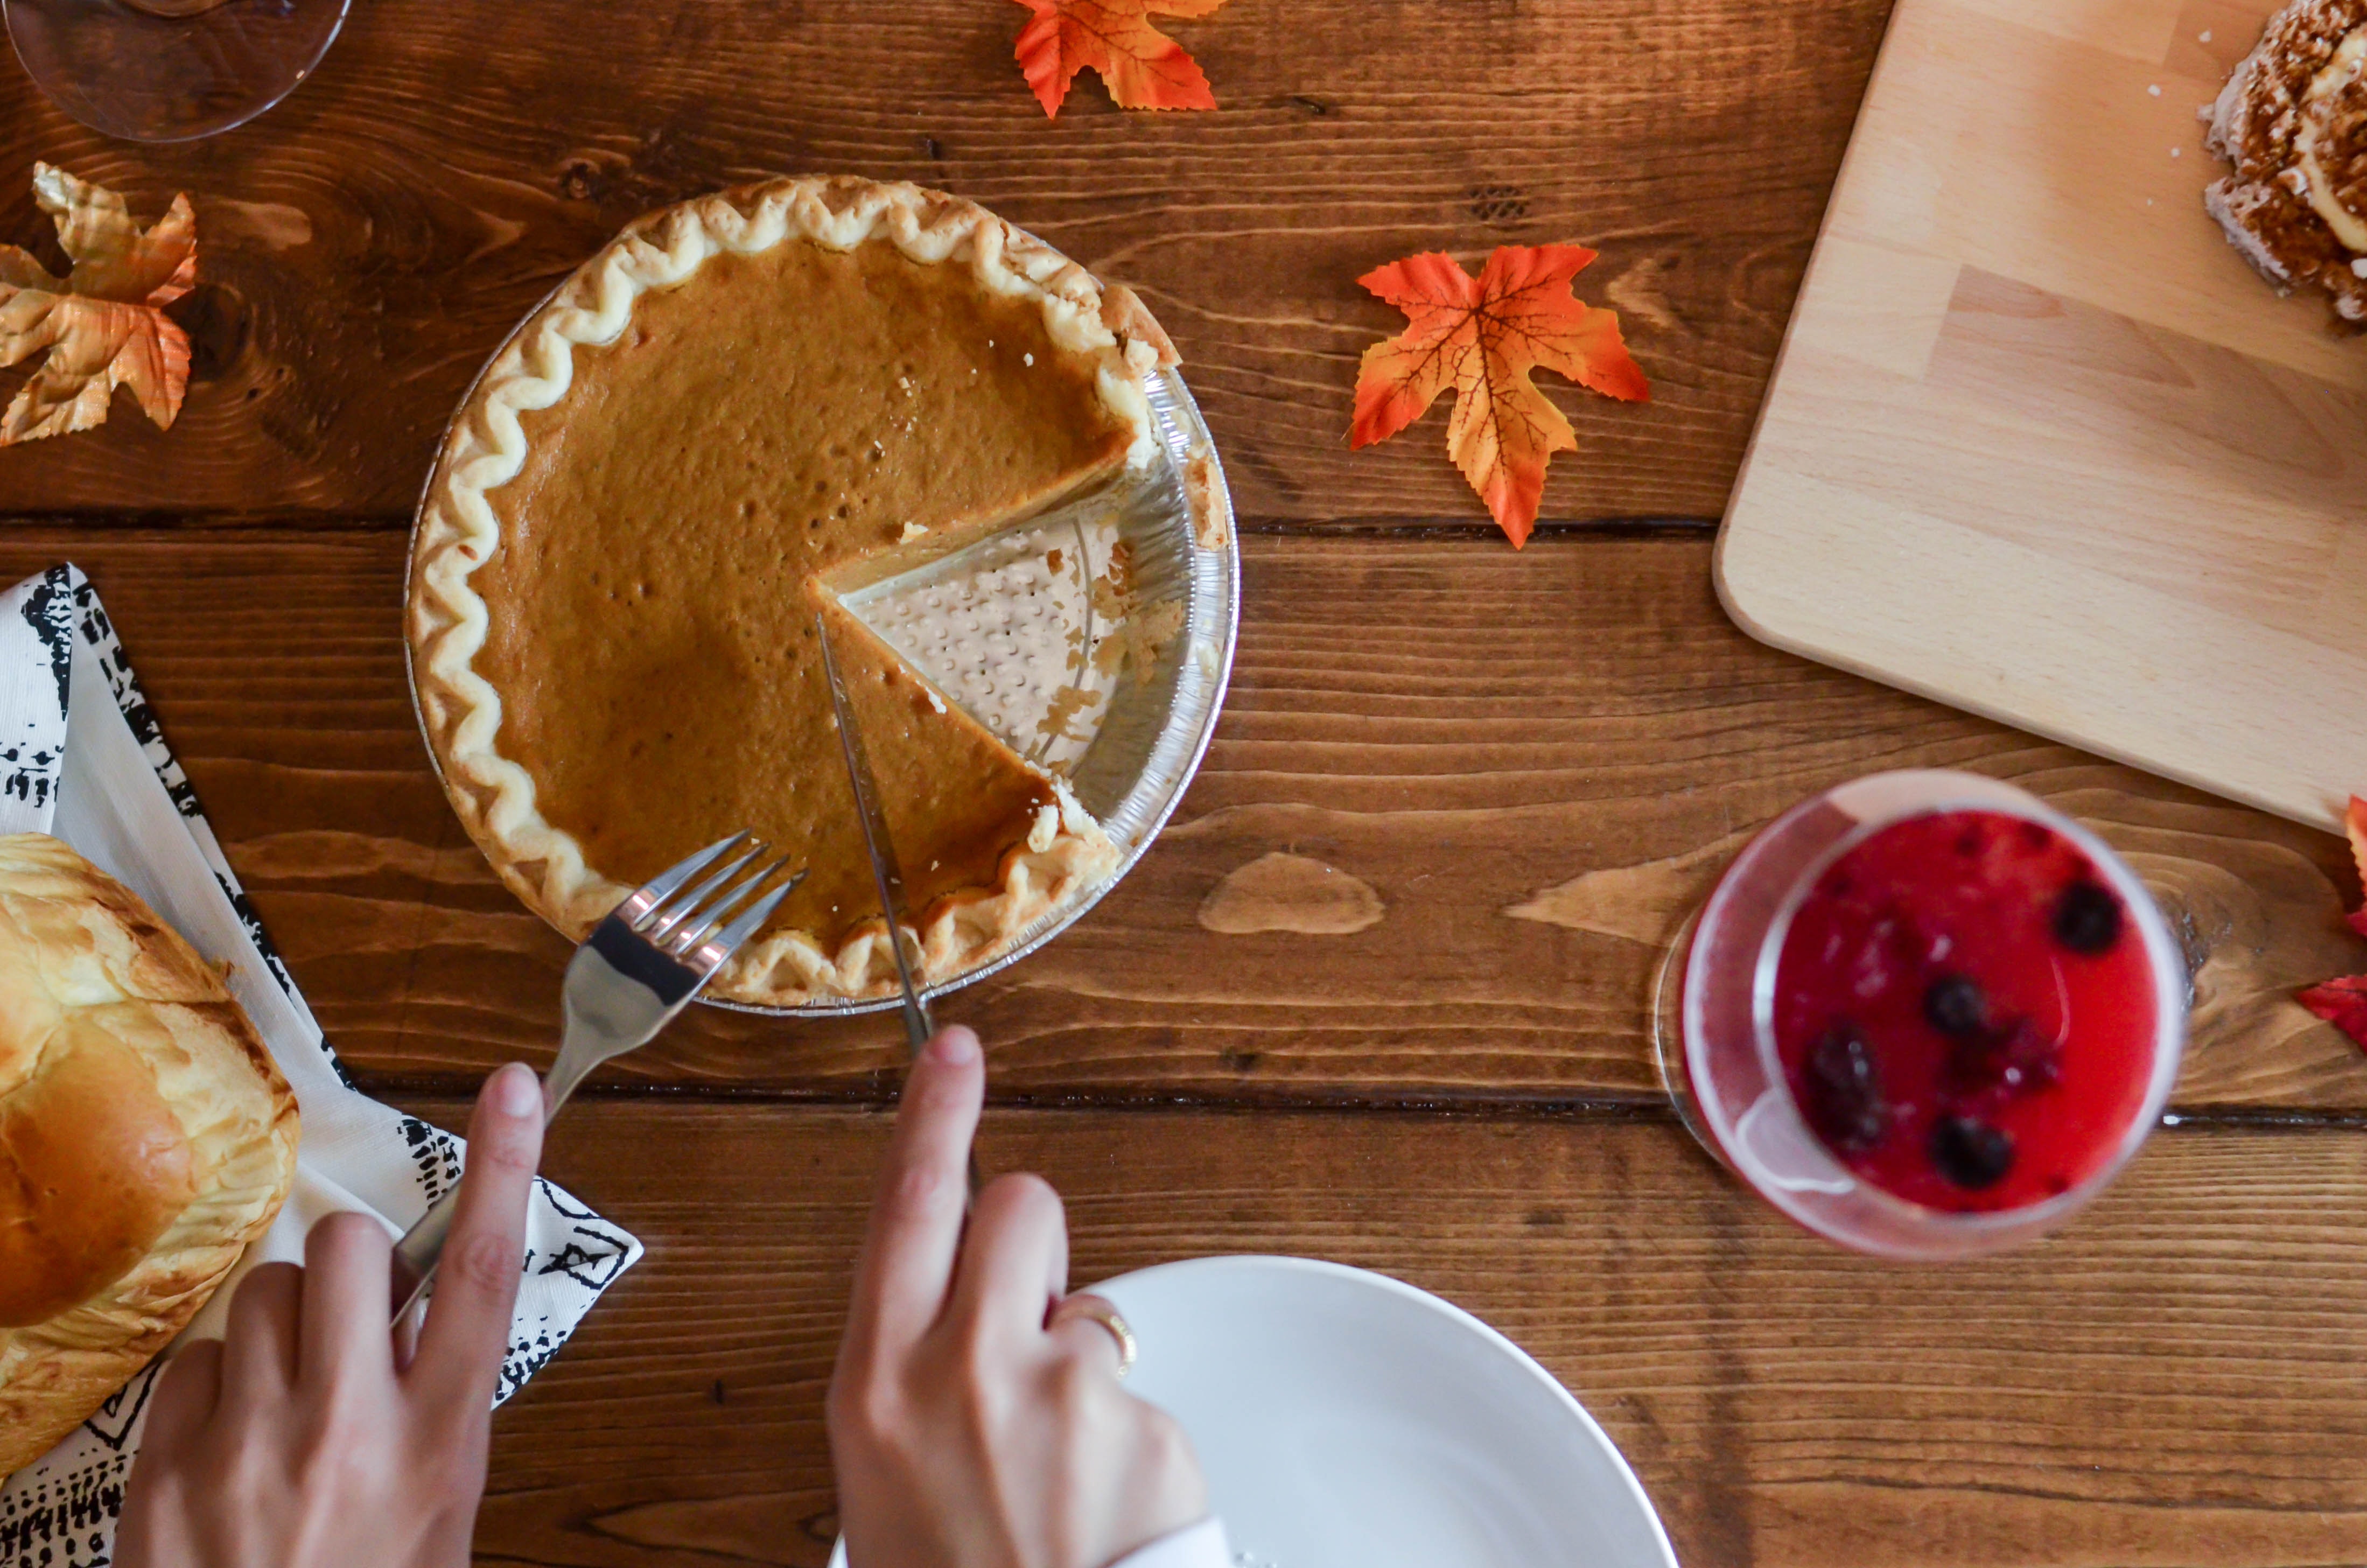 person-holding-knife-and-fork-cutting-slice-of-pie-on-brown-669734.jpg